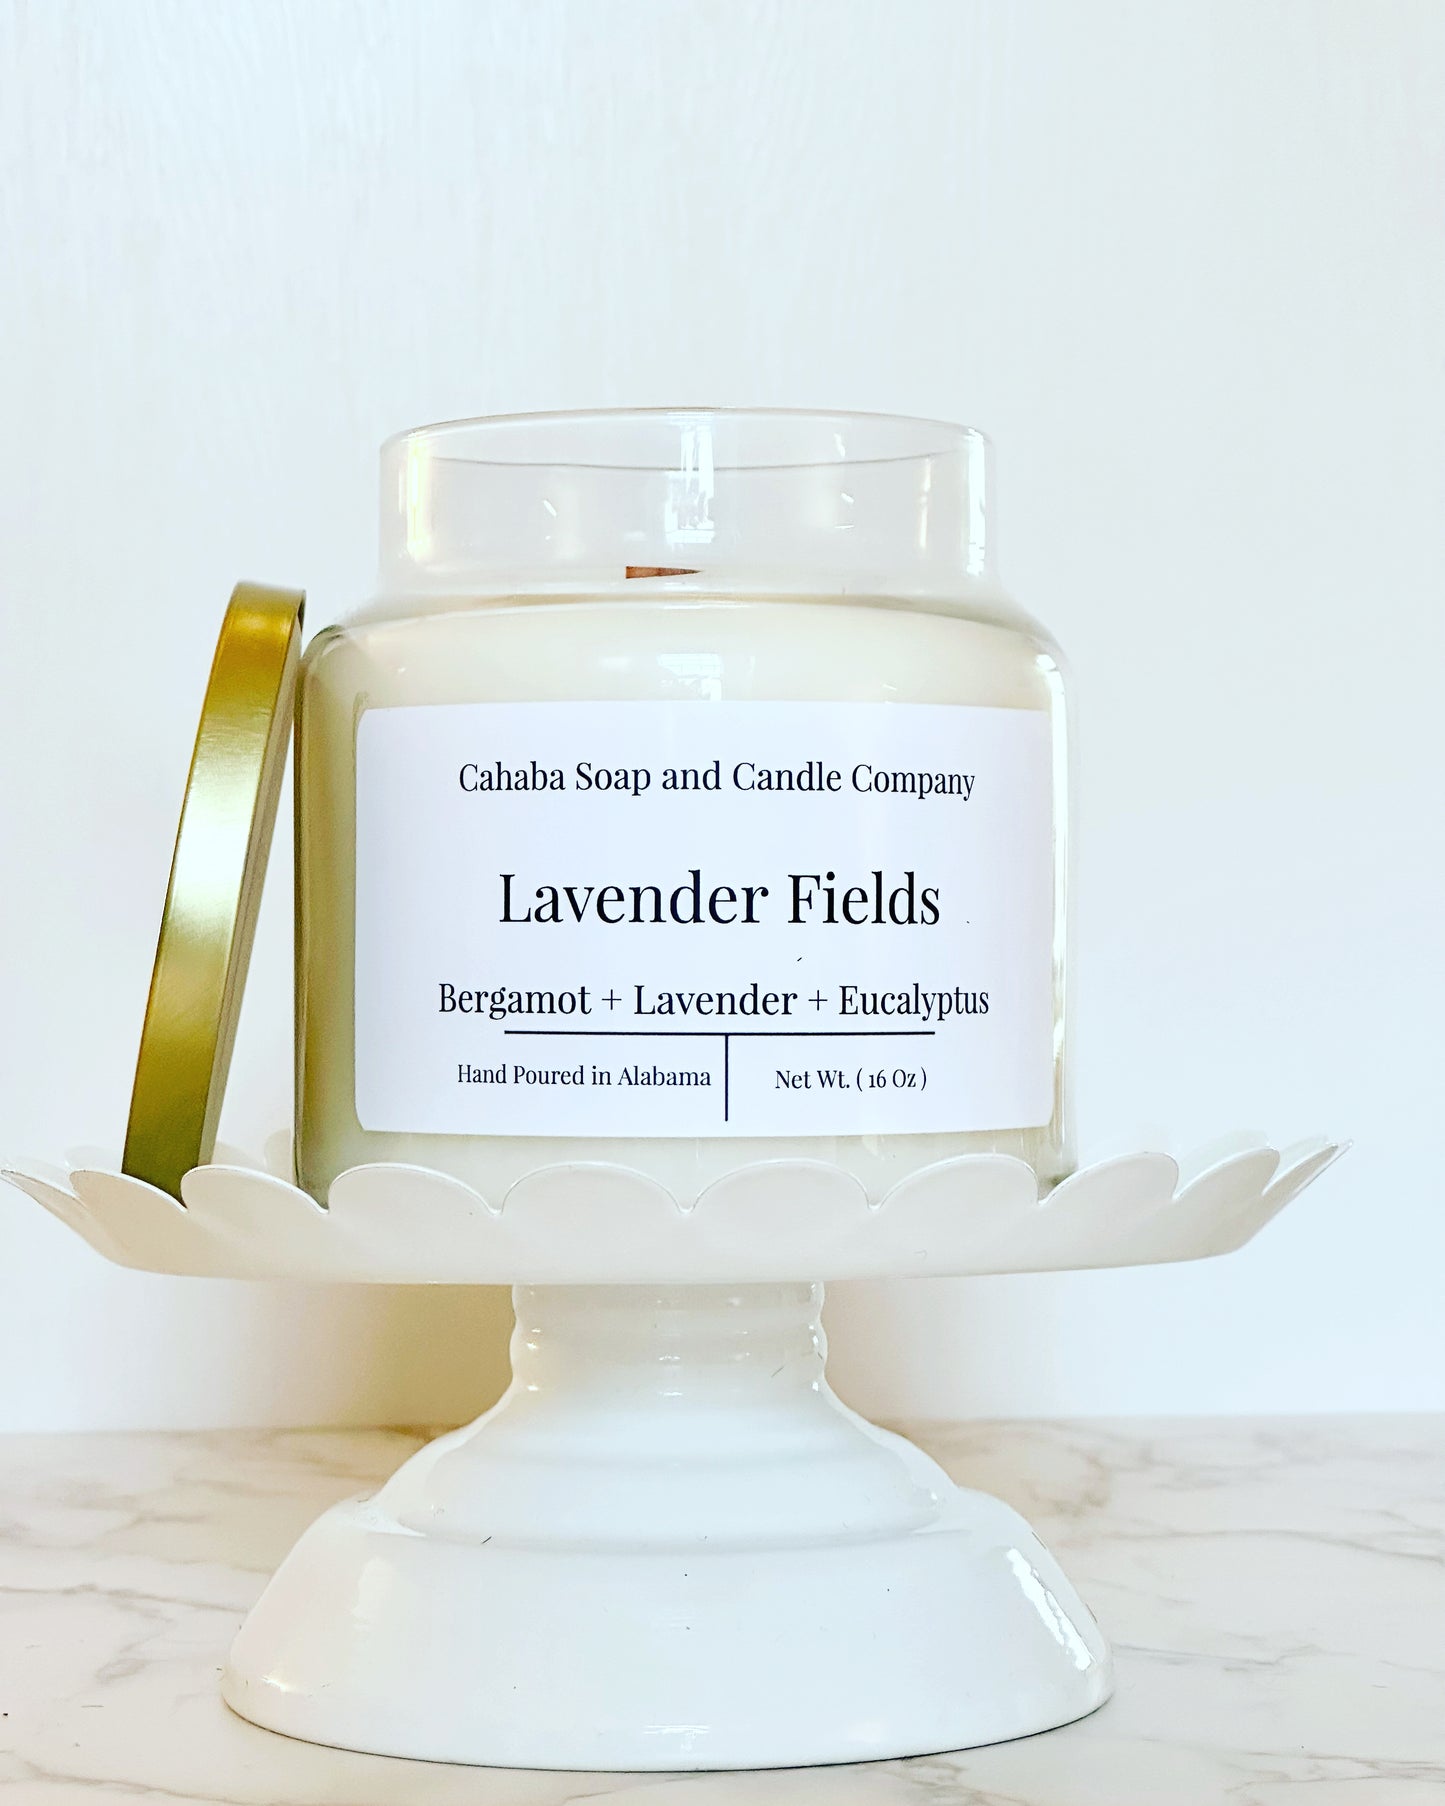 Lavender Fields - Cahaba Soap and Candle Company